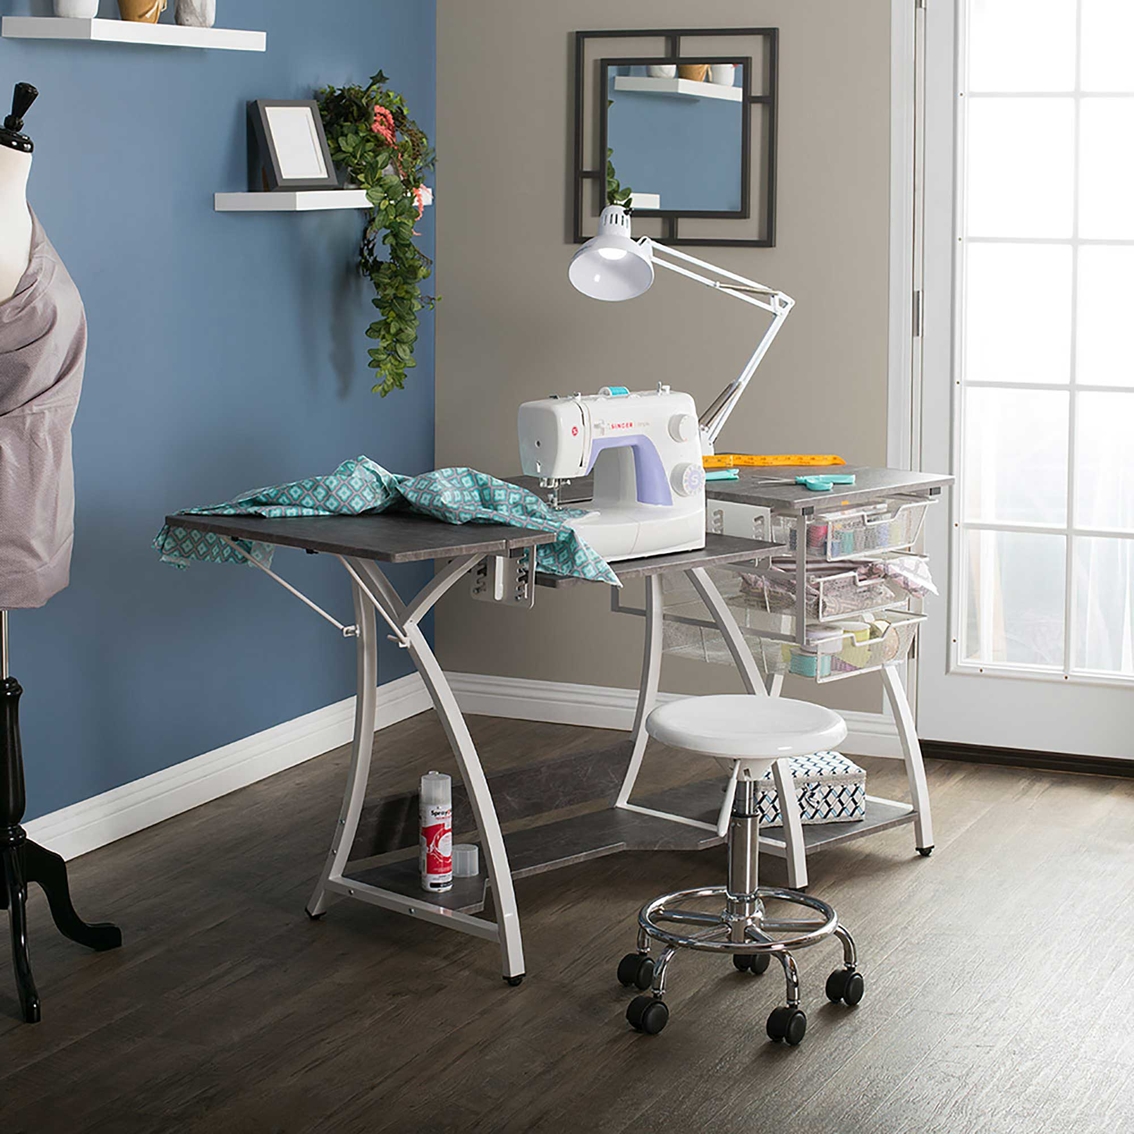 Sew Ready Pro Stitch Sewing Table - Image 8 of 8